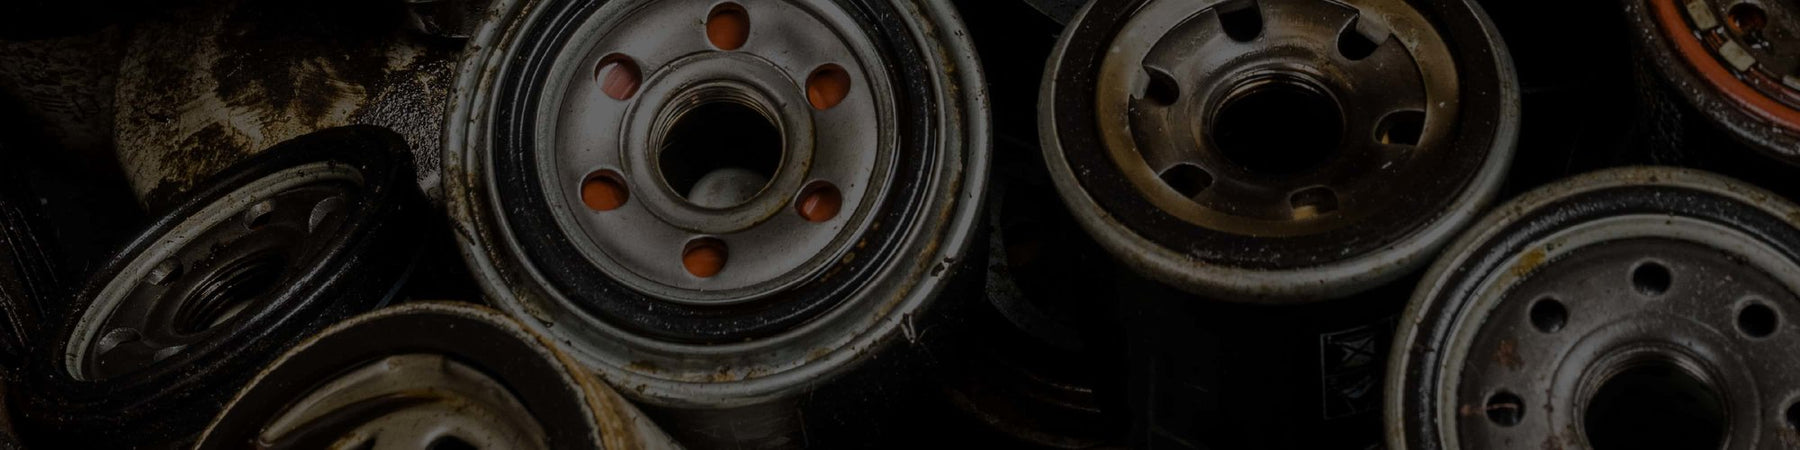 5 Signs of a Bad Fuel Filter That Needs Replacing